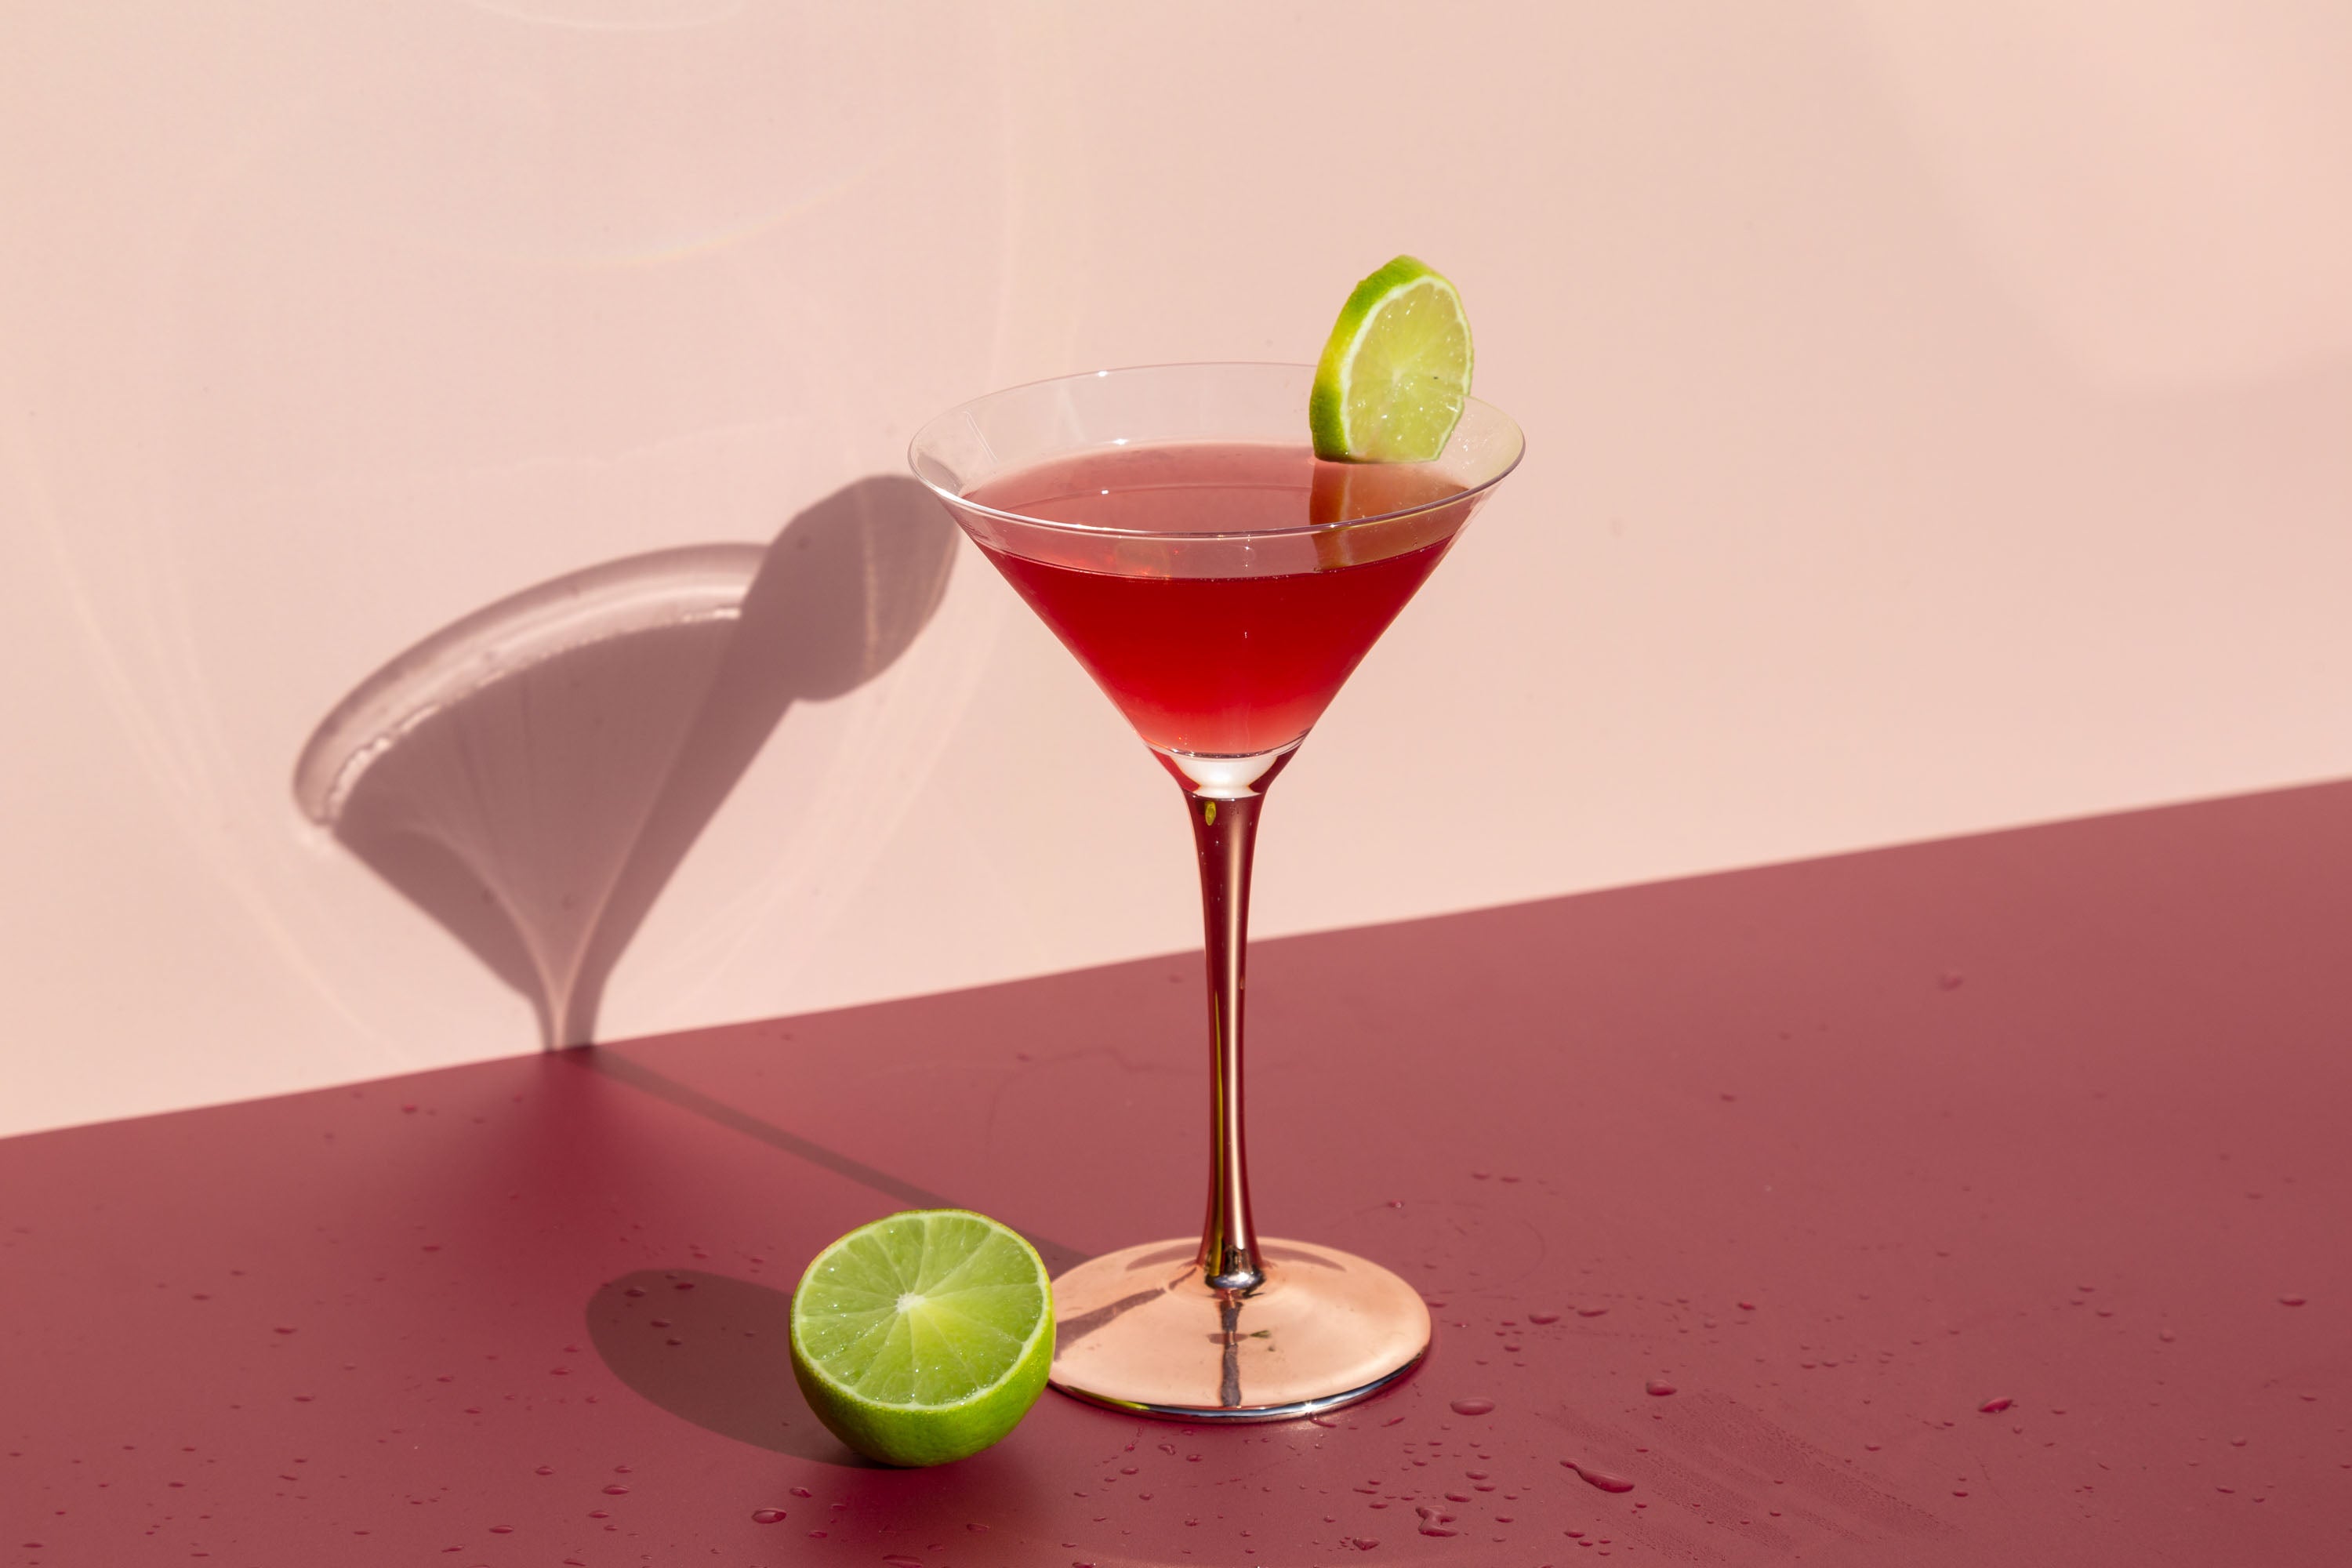 Cosmopolitan cocktail against pink backdrop with wedge of lime in foreground